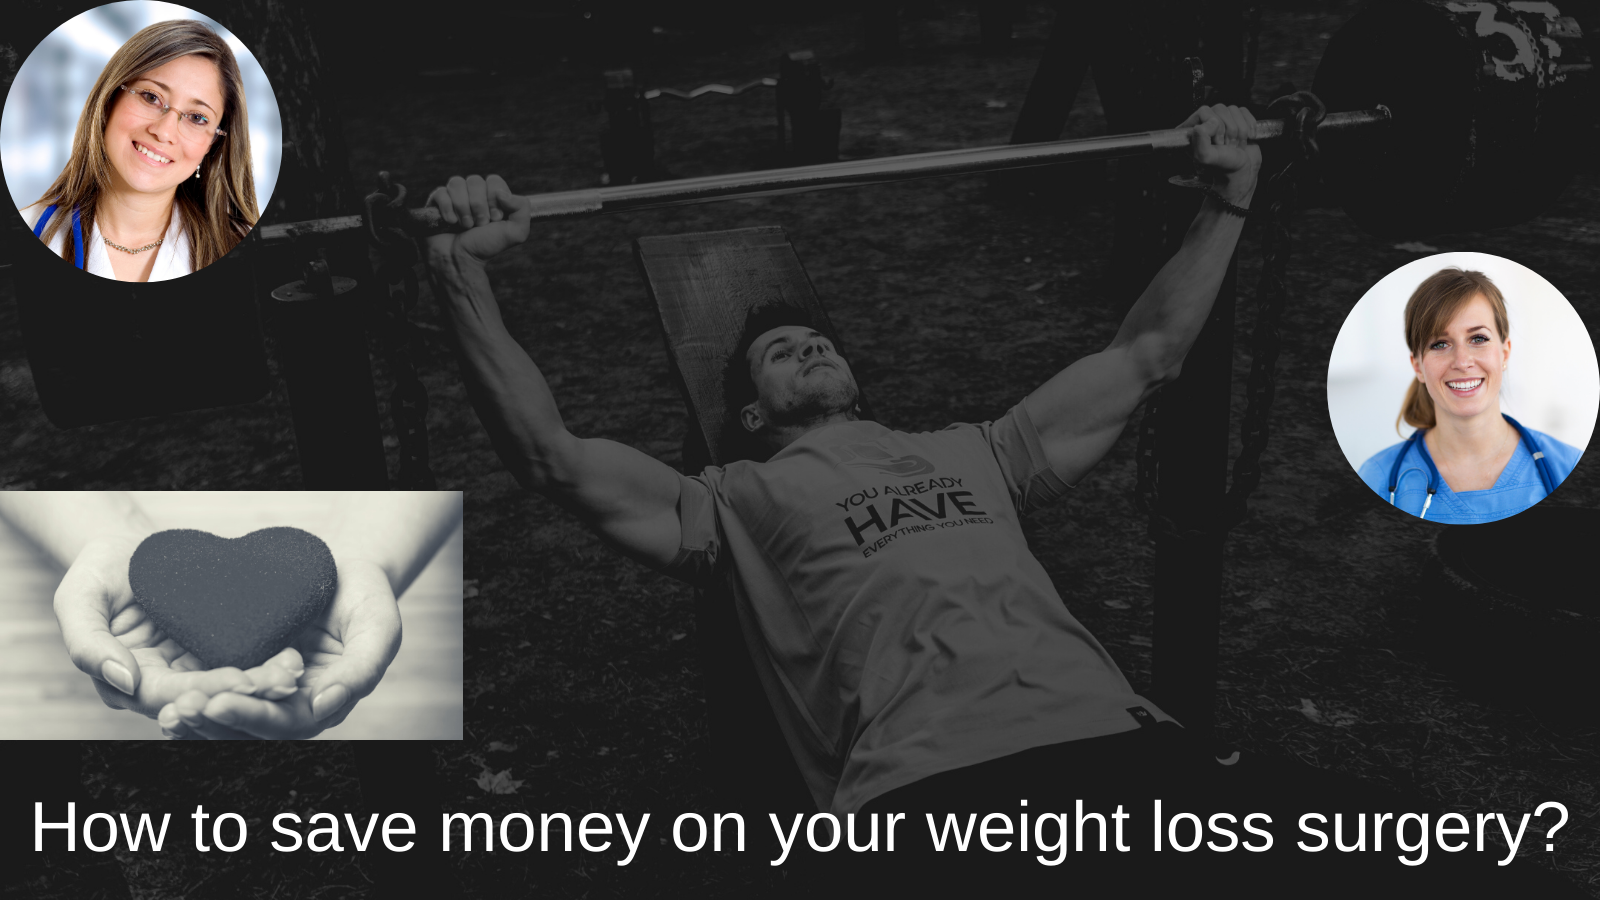 How to save money on your weight loss surgery?